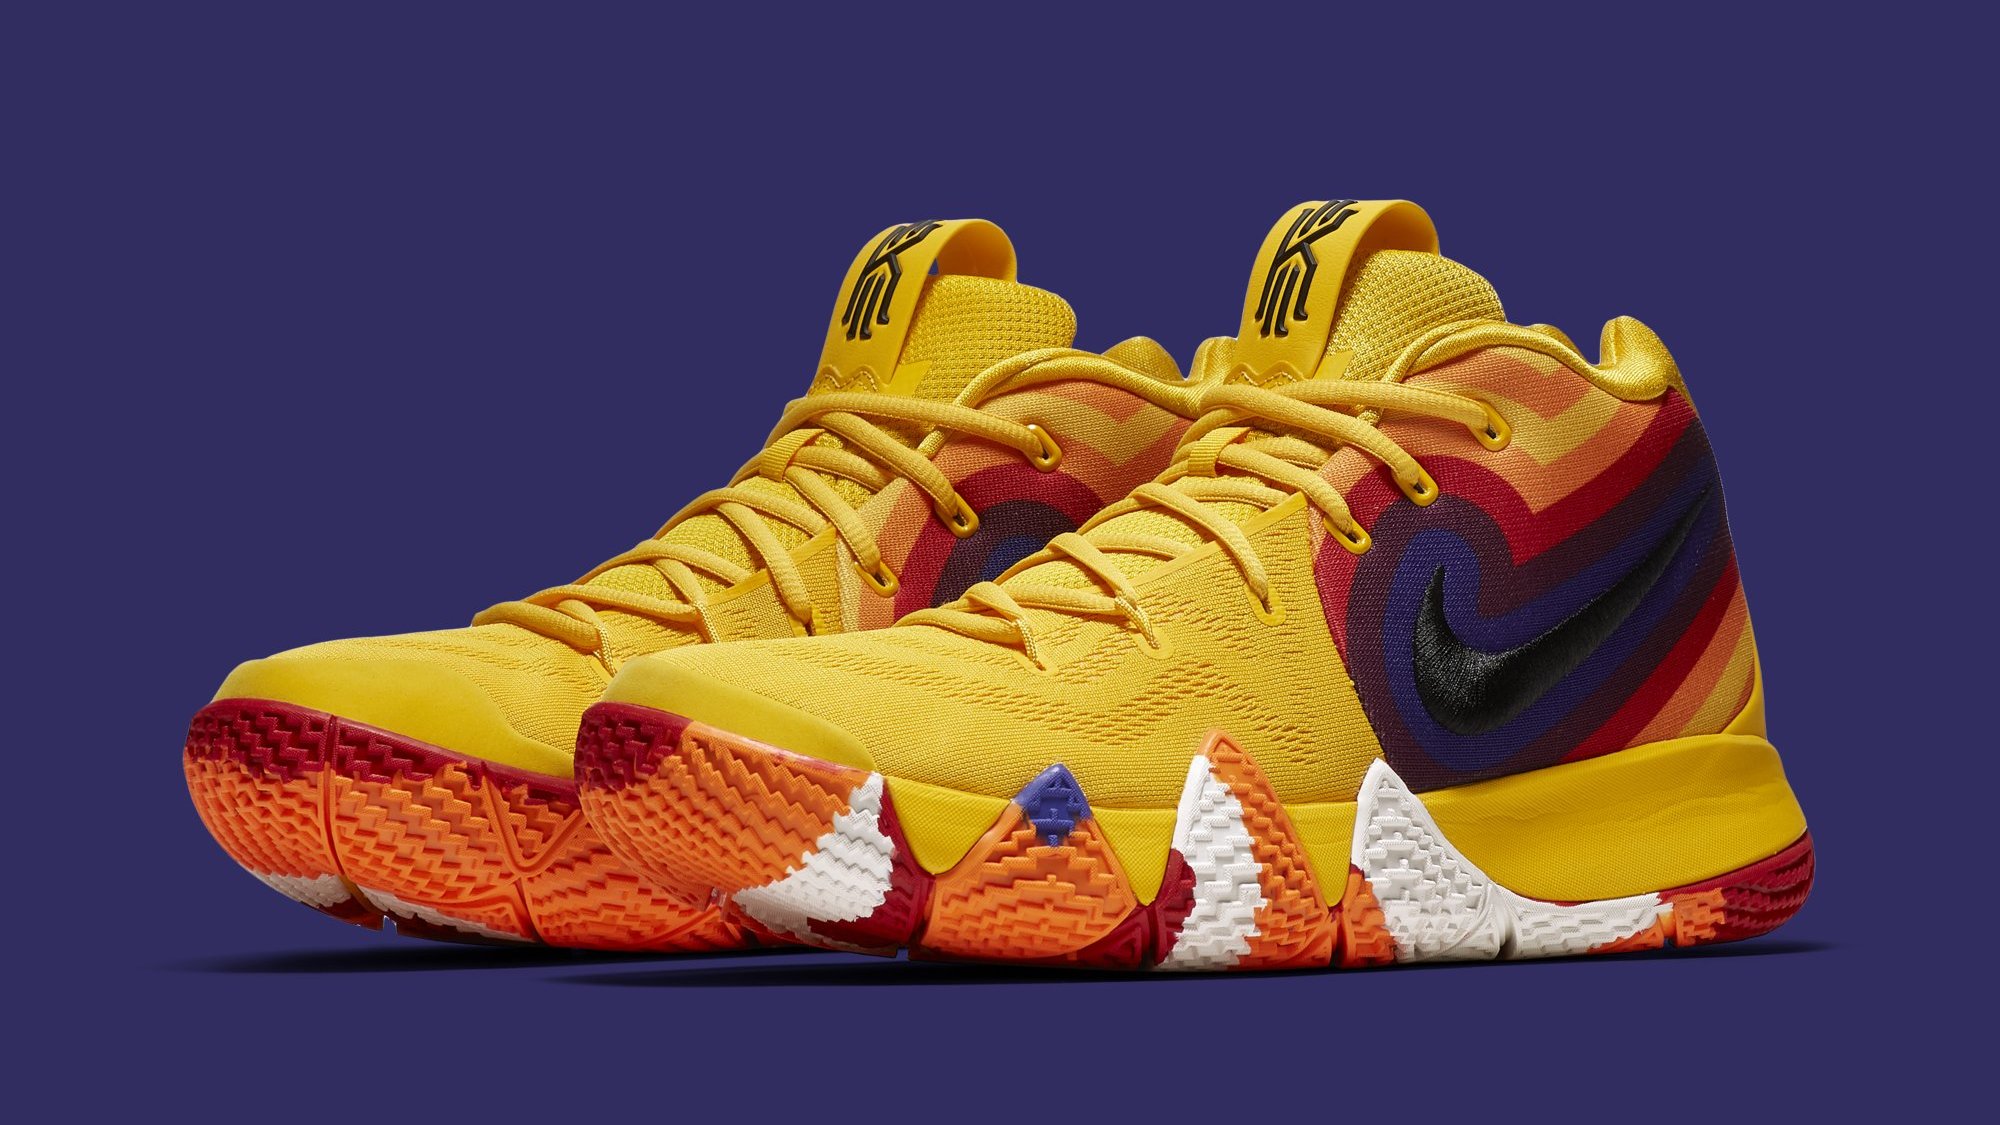 kyrie 4 yellow